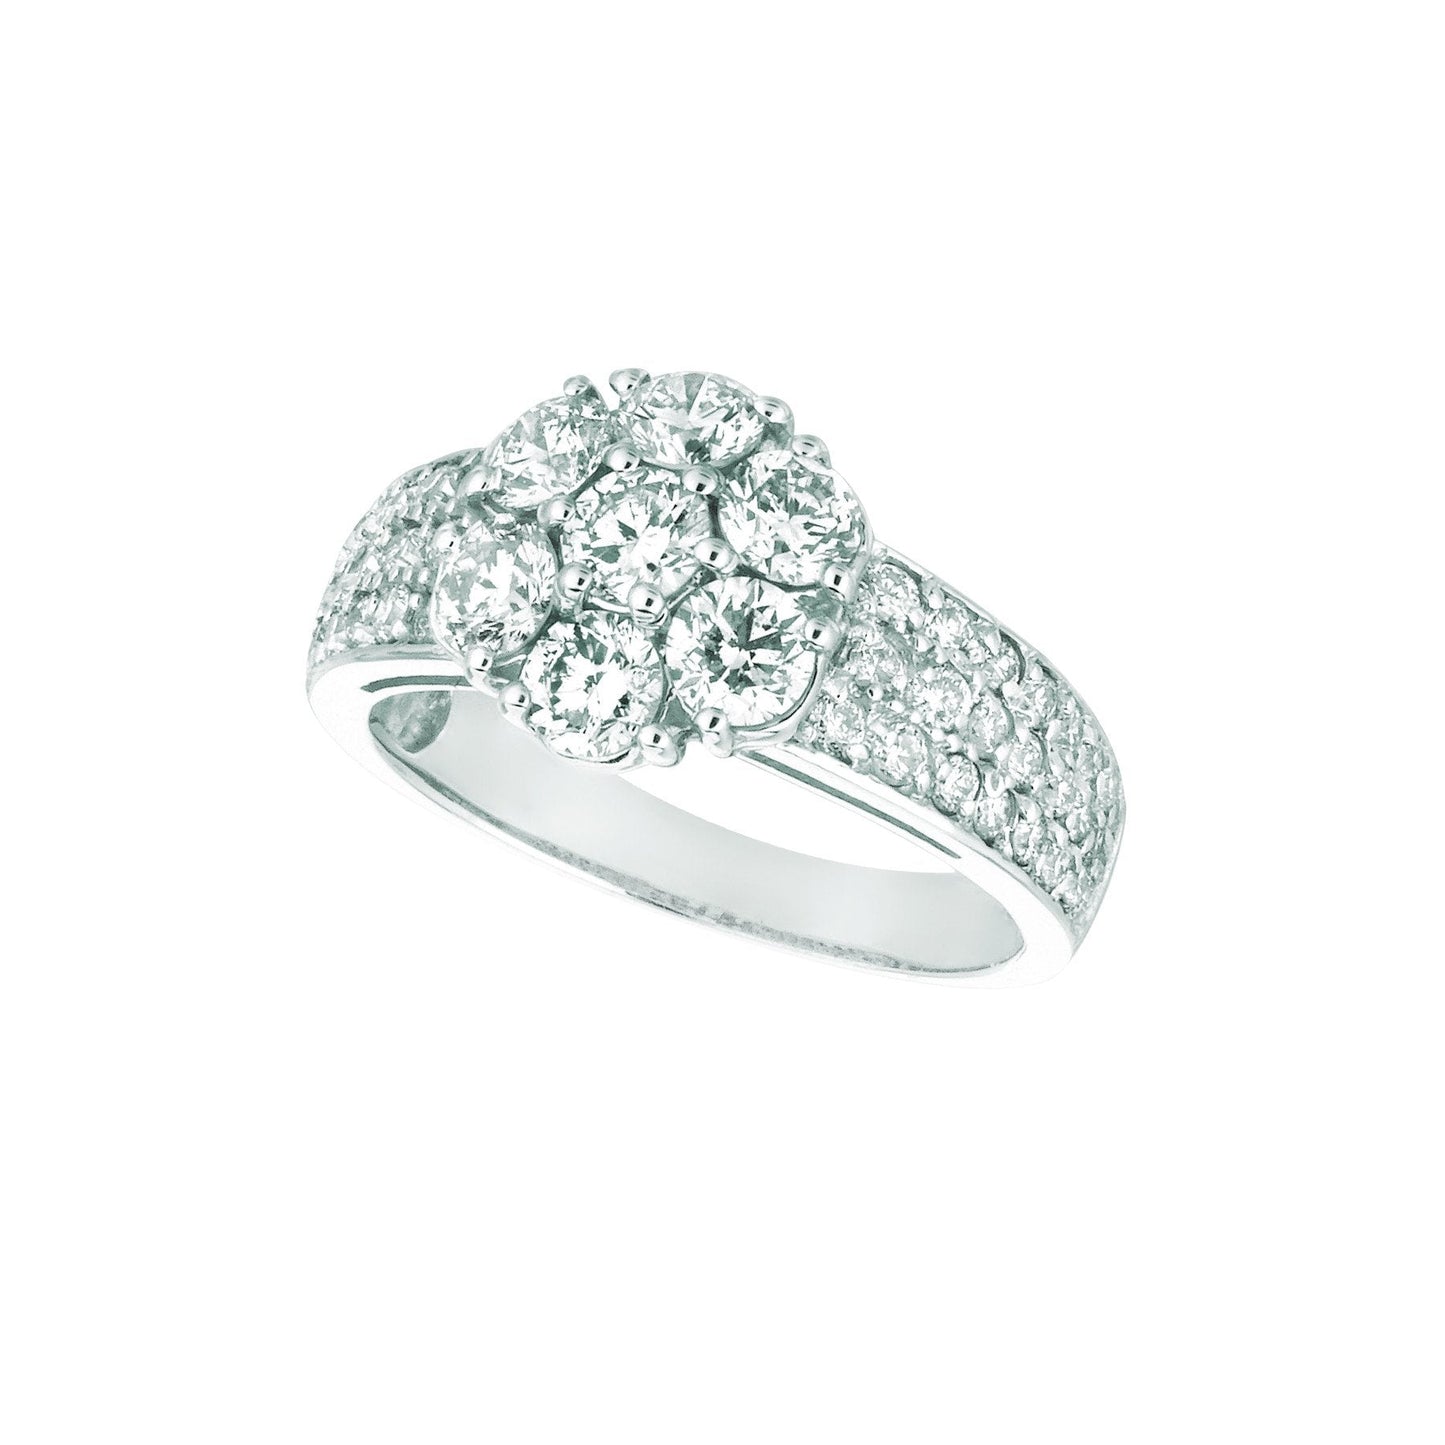 Real Diamond Flower Fancy Ring 2 Carats 14K White Gold With Accents